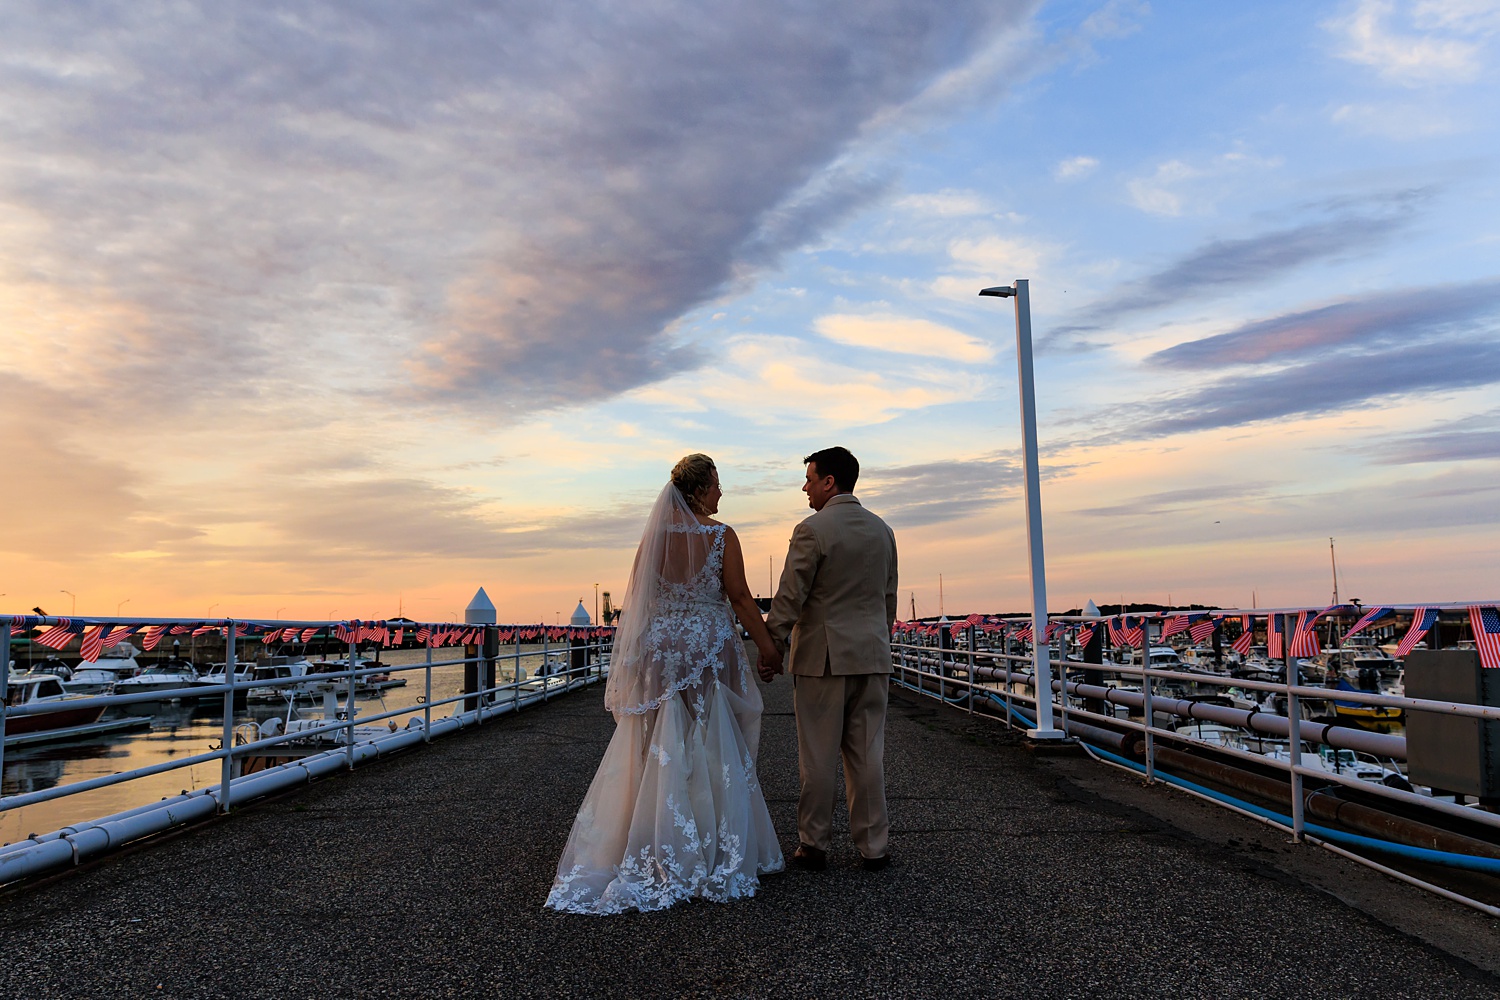 The bride and groom in front of the sunset on their wedding day in the marina